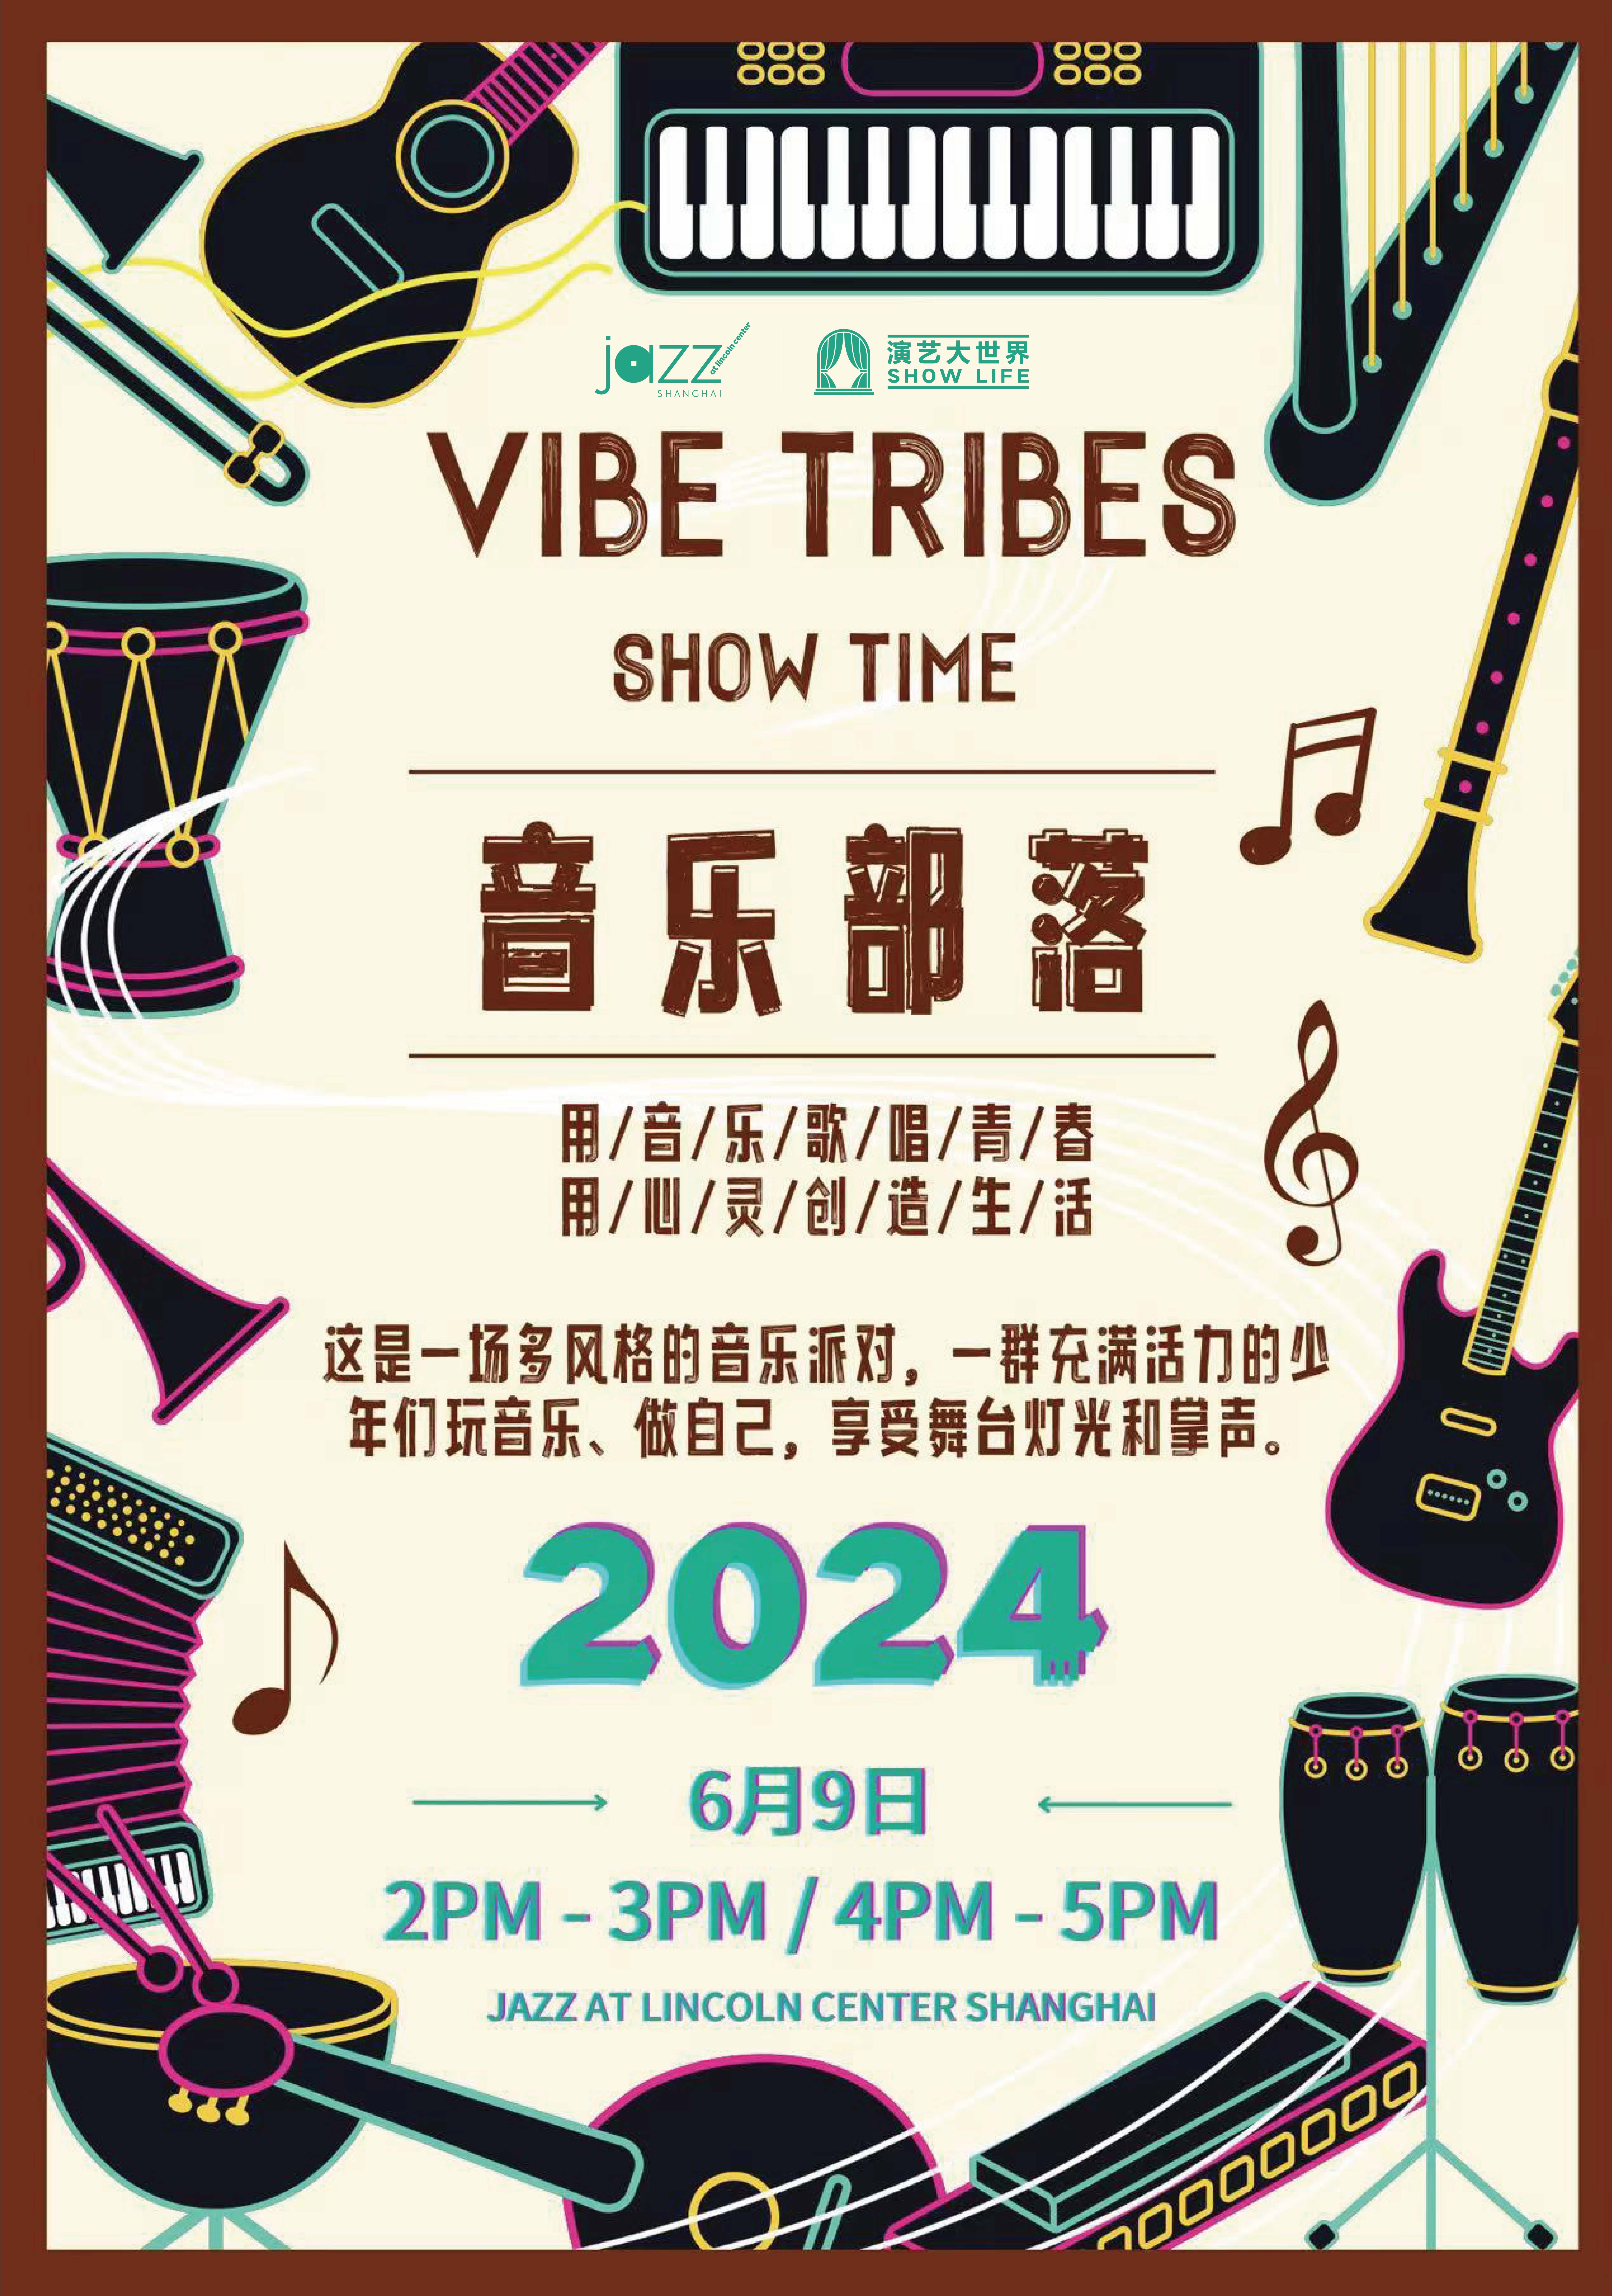 6.9 Vibe Tribes Show Time 音乐部落